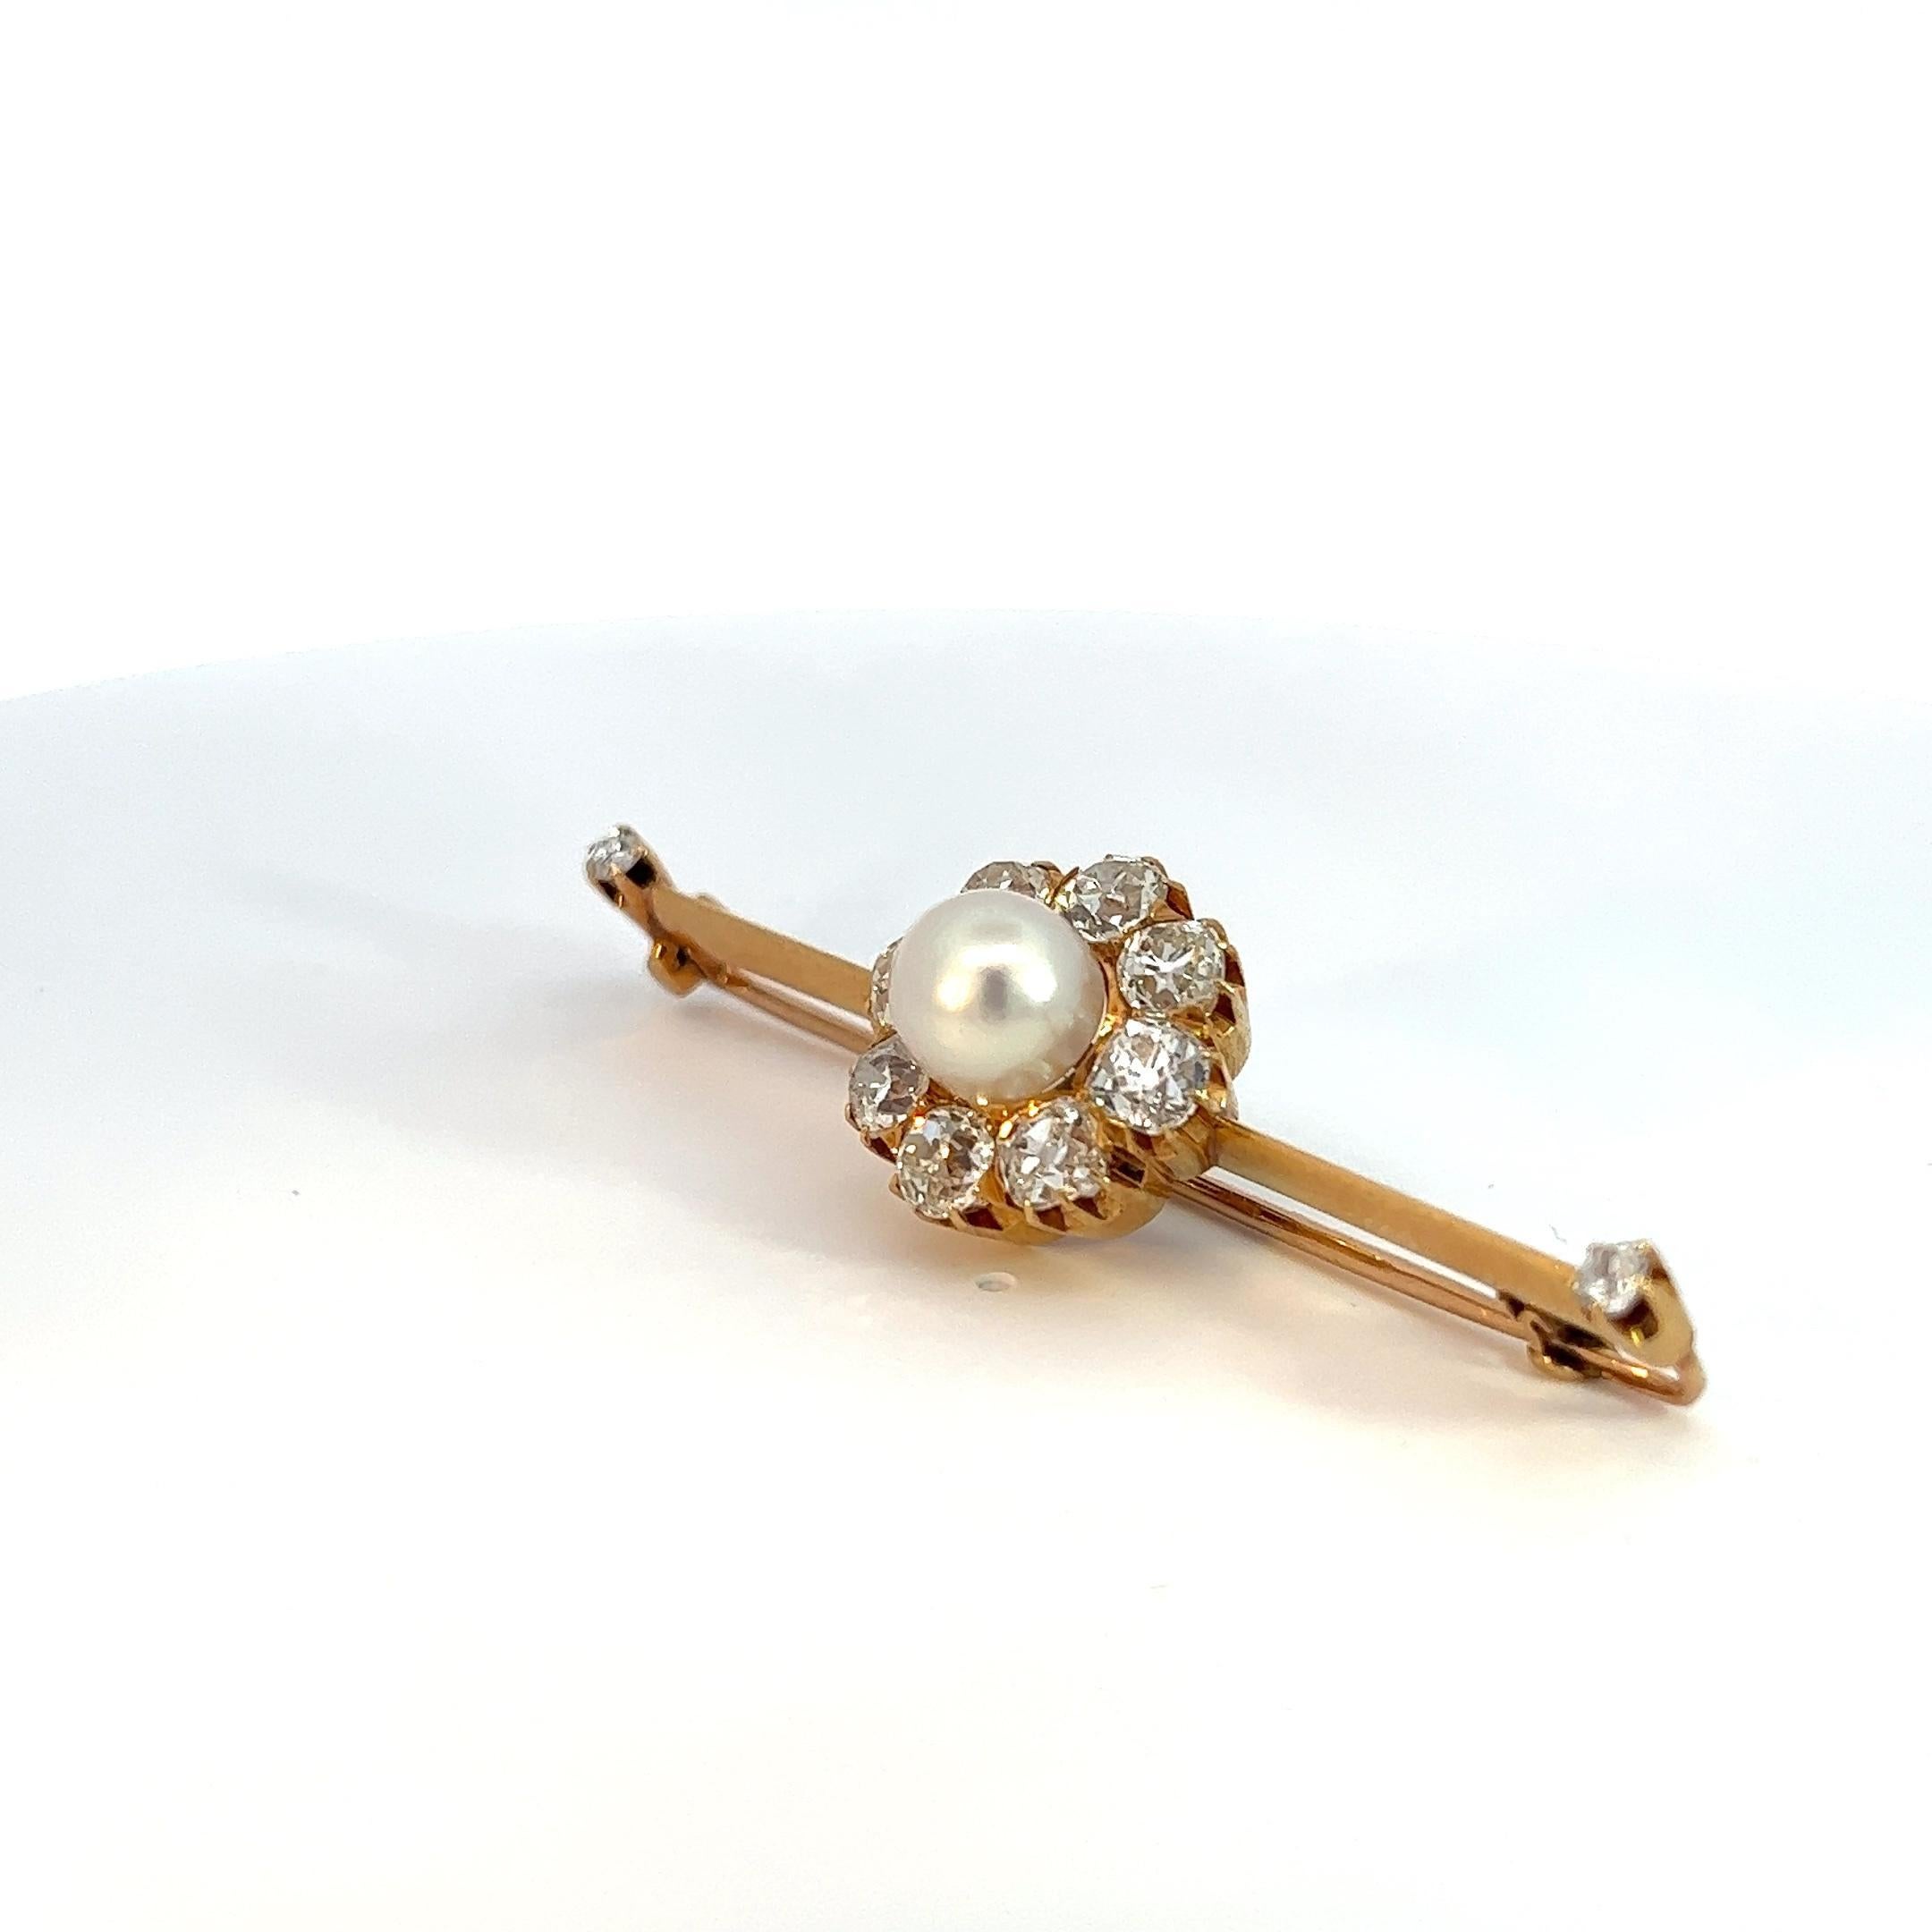 Introducing our Natural Pearl and Old European Cut Diamond Tie Pin, a distinguished accessory that seamlessly blends vintage charm with contemporary elegance. This exquisite piece features a lustrous Natural Saltwater Pearl paired with a stunning